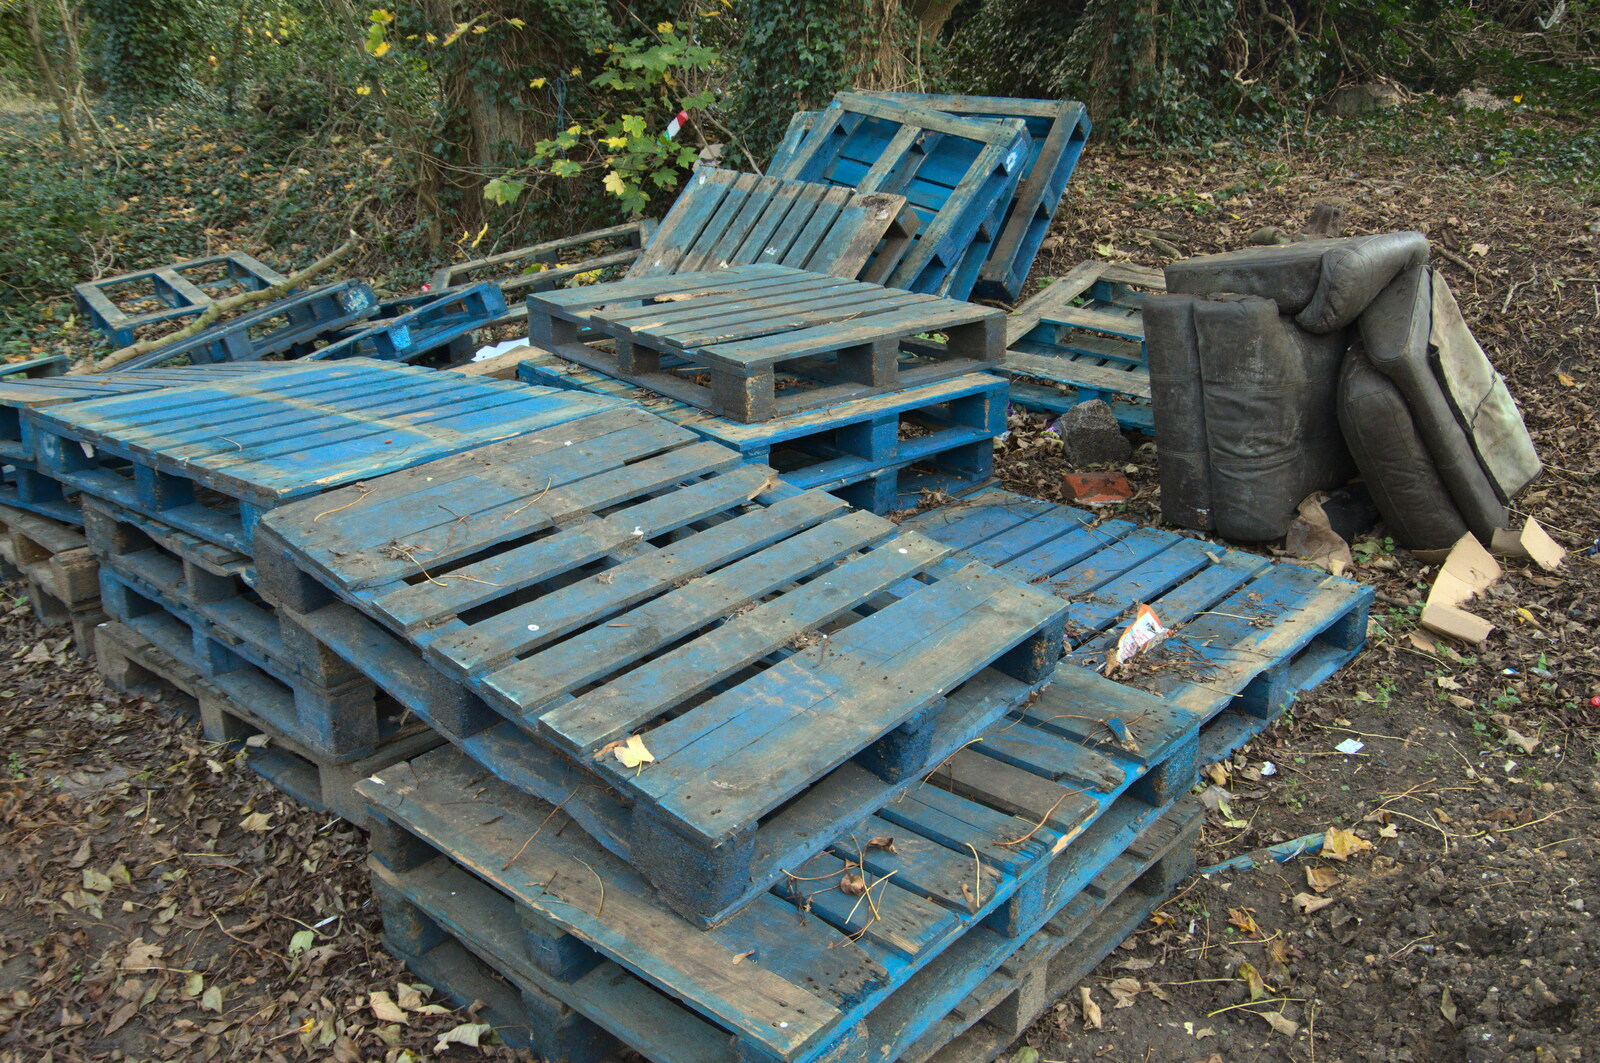 A big pile of pallets acts as a bike ramp from The Dereliction of Eye, Suffolk - 22nd November 2020